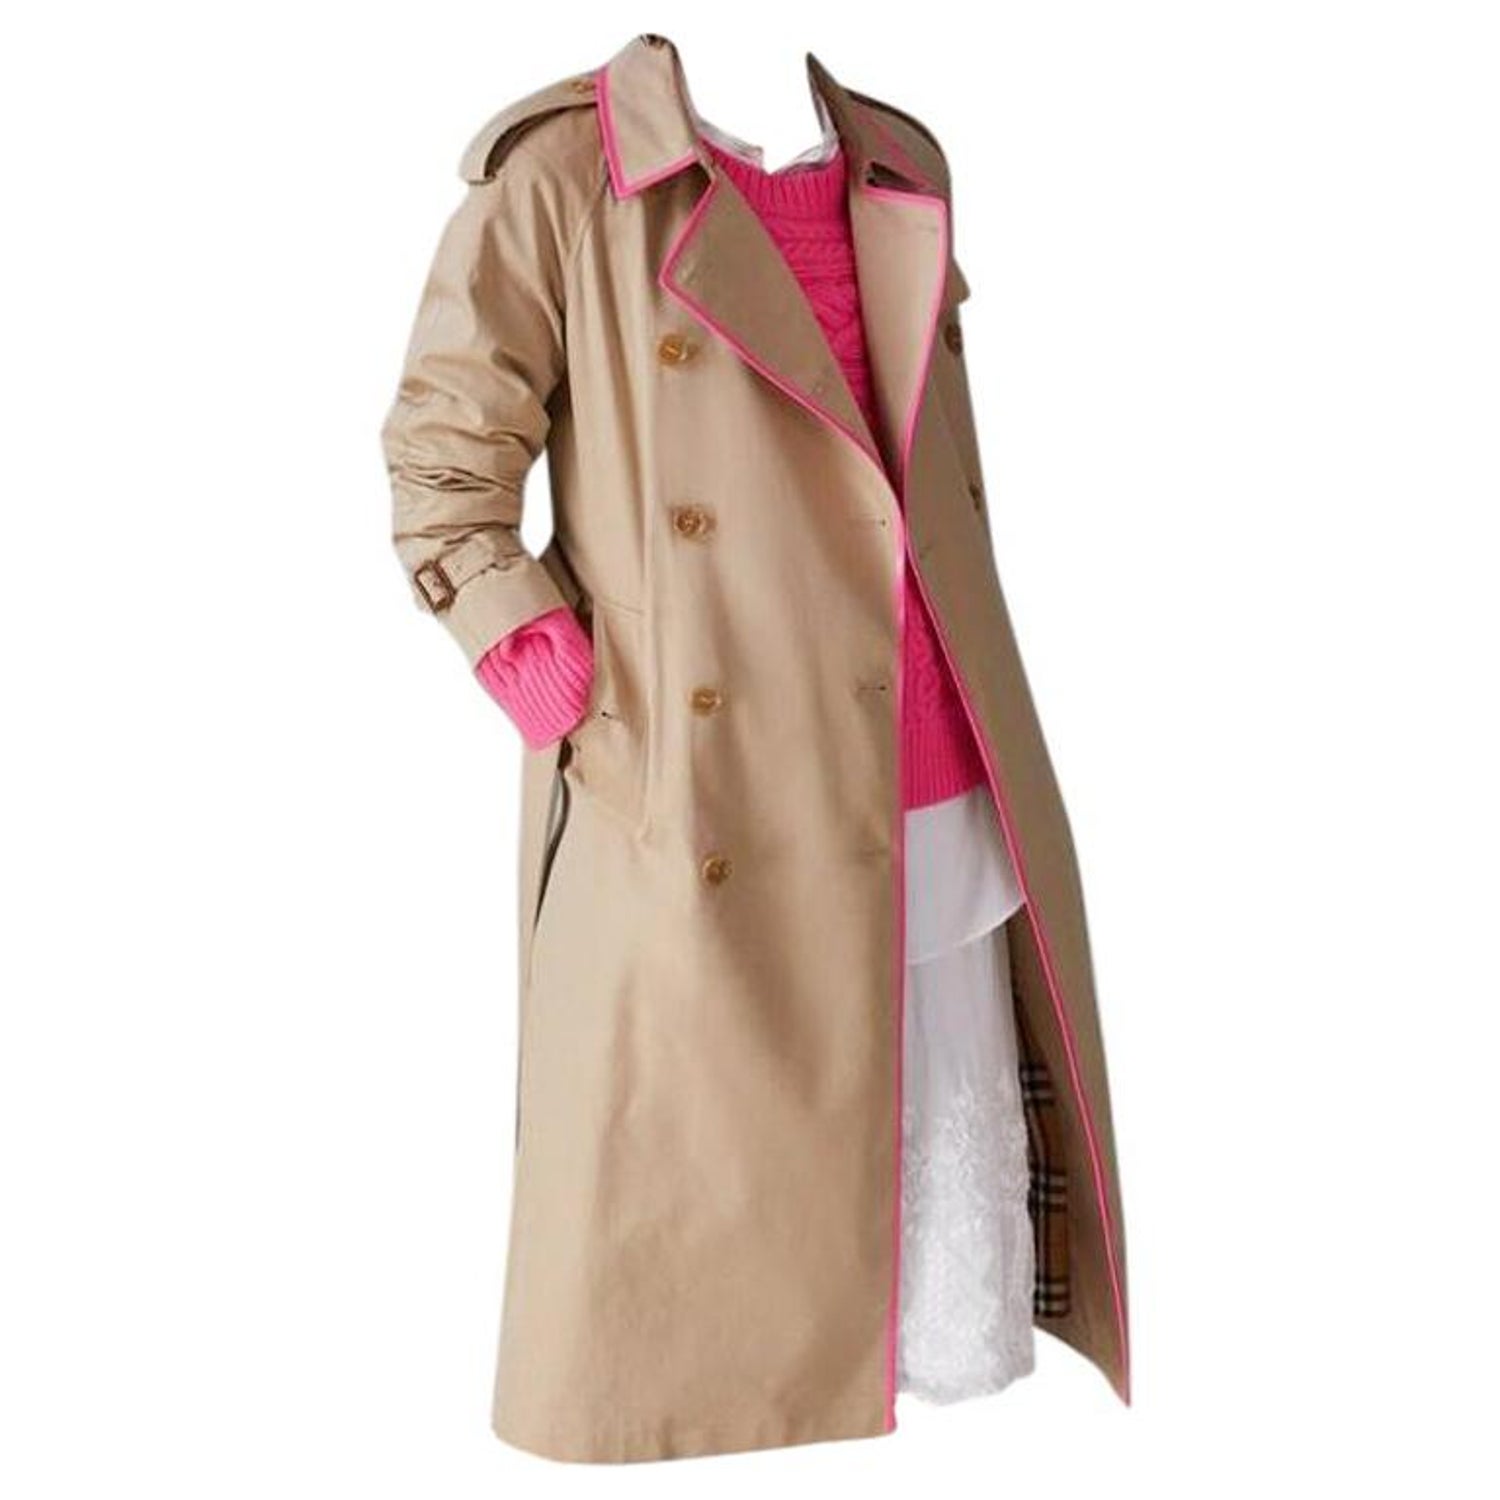 Burberry Pink Coat - 5 For Sale on 1stDibs